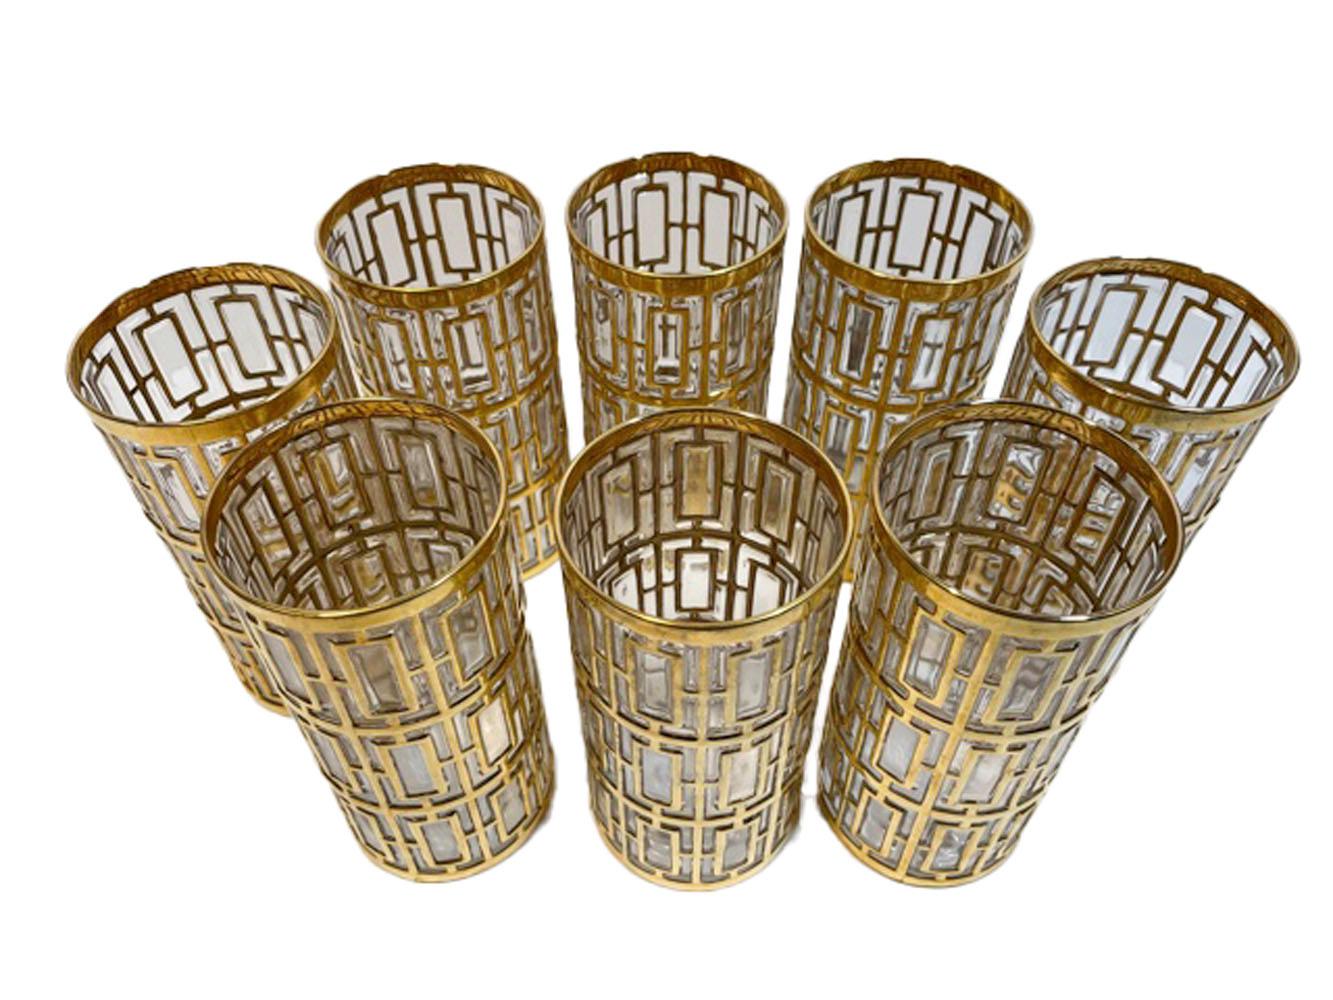 Set of 8 (2 sets available) mid-century modern highball glasses made by Imperial Glass Co. in the Shoji Pattern. Each piece is molded with a raised pattern inspired by Japanese Shoji screens, the raised areas are then gilded in 22k gold.